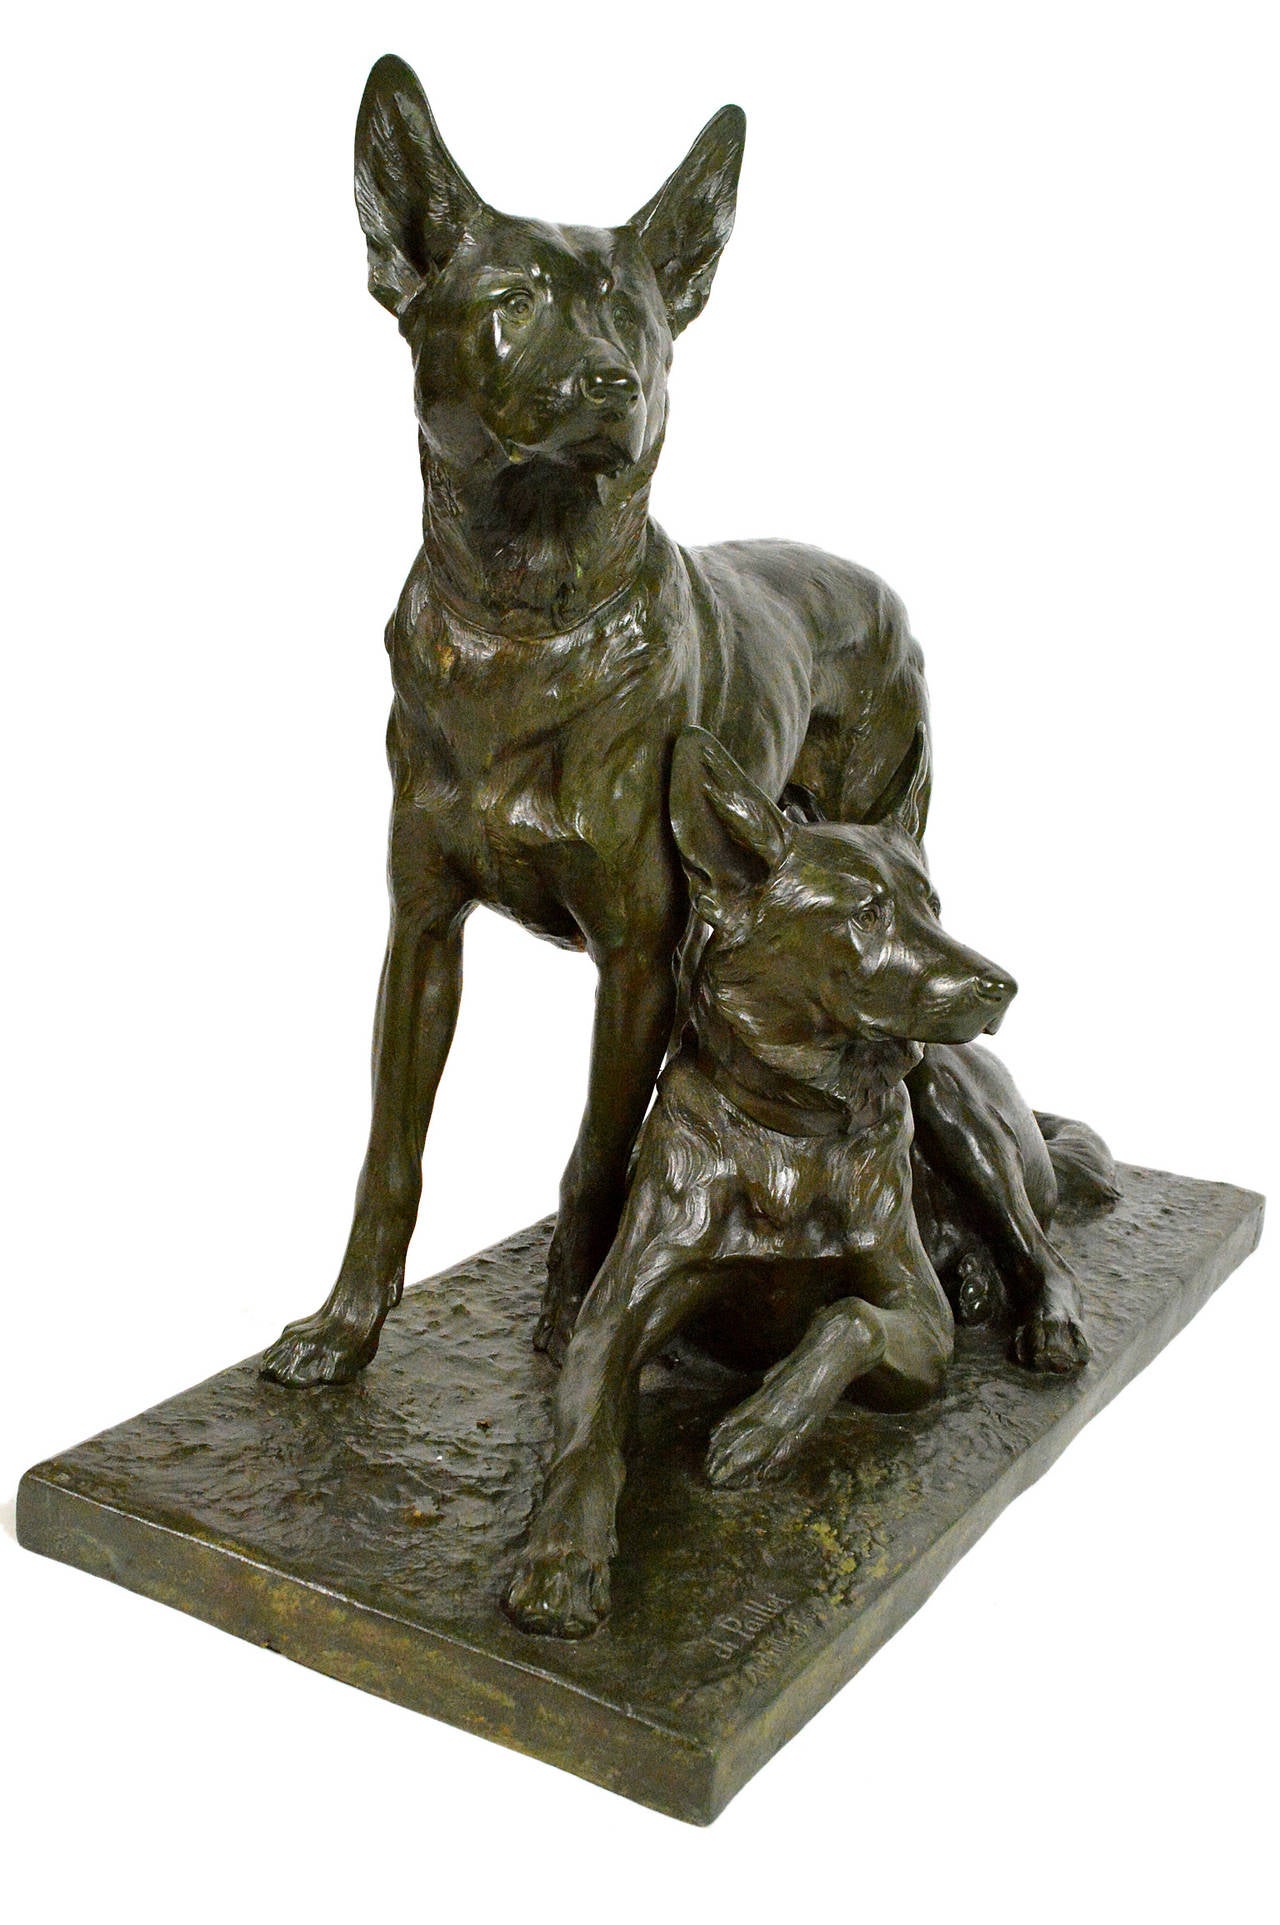 Charles Paillet (1871-1937, France) monumental patinated bronze grouping with a pair of German Shepherd dogs, one laying down and one standing. Signed 